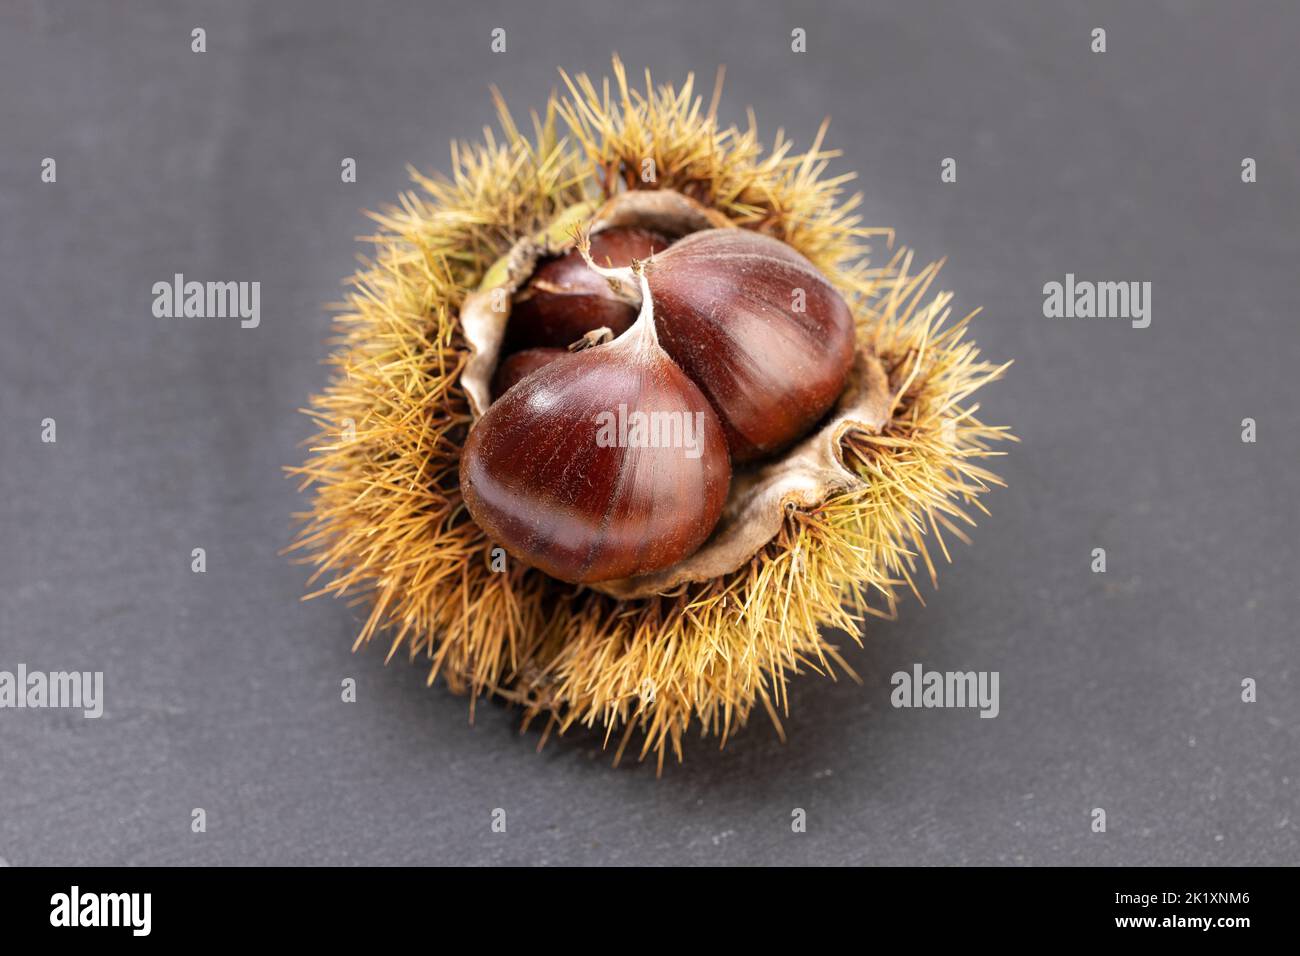 Open husk and sweet chestnuts inside isolated on gray slate background. Castanea sativa Stock Photo